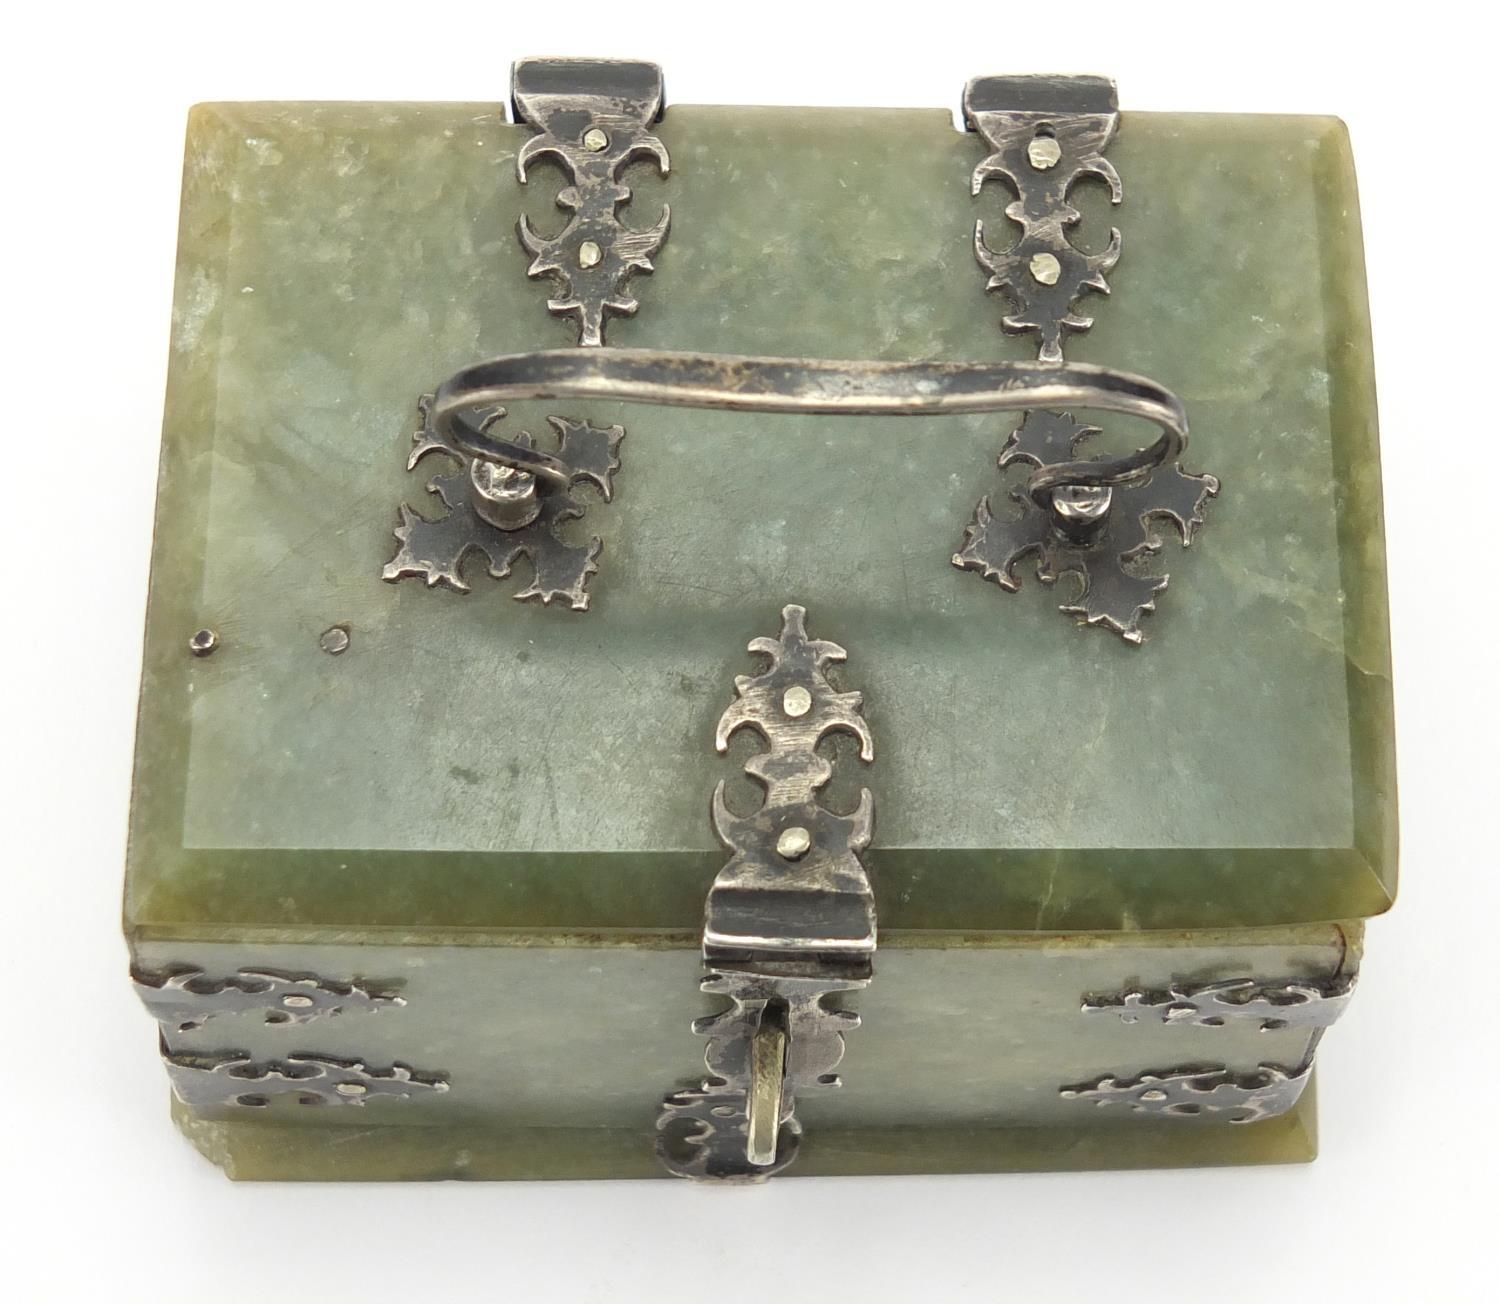 19th century Indian Mughal green jade casket, with silver mounts and swing handle, 5cm H x 9cm W x - Image 7 of 8